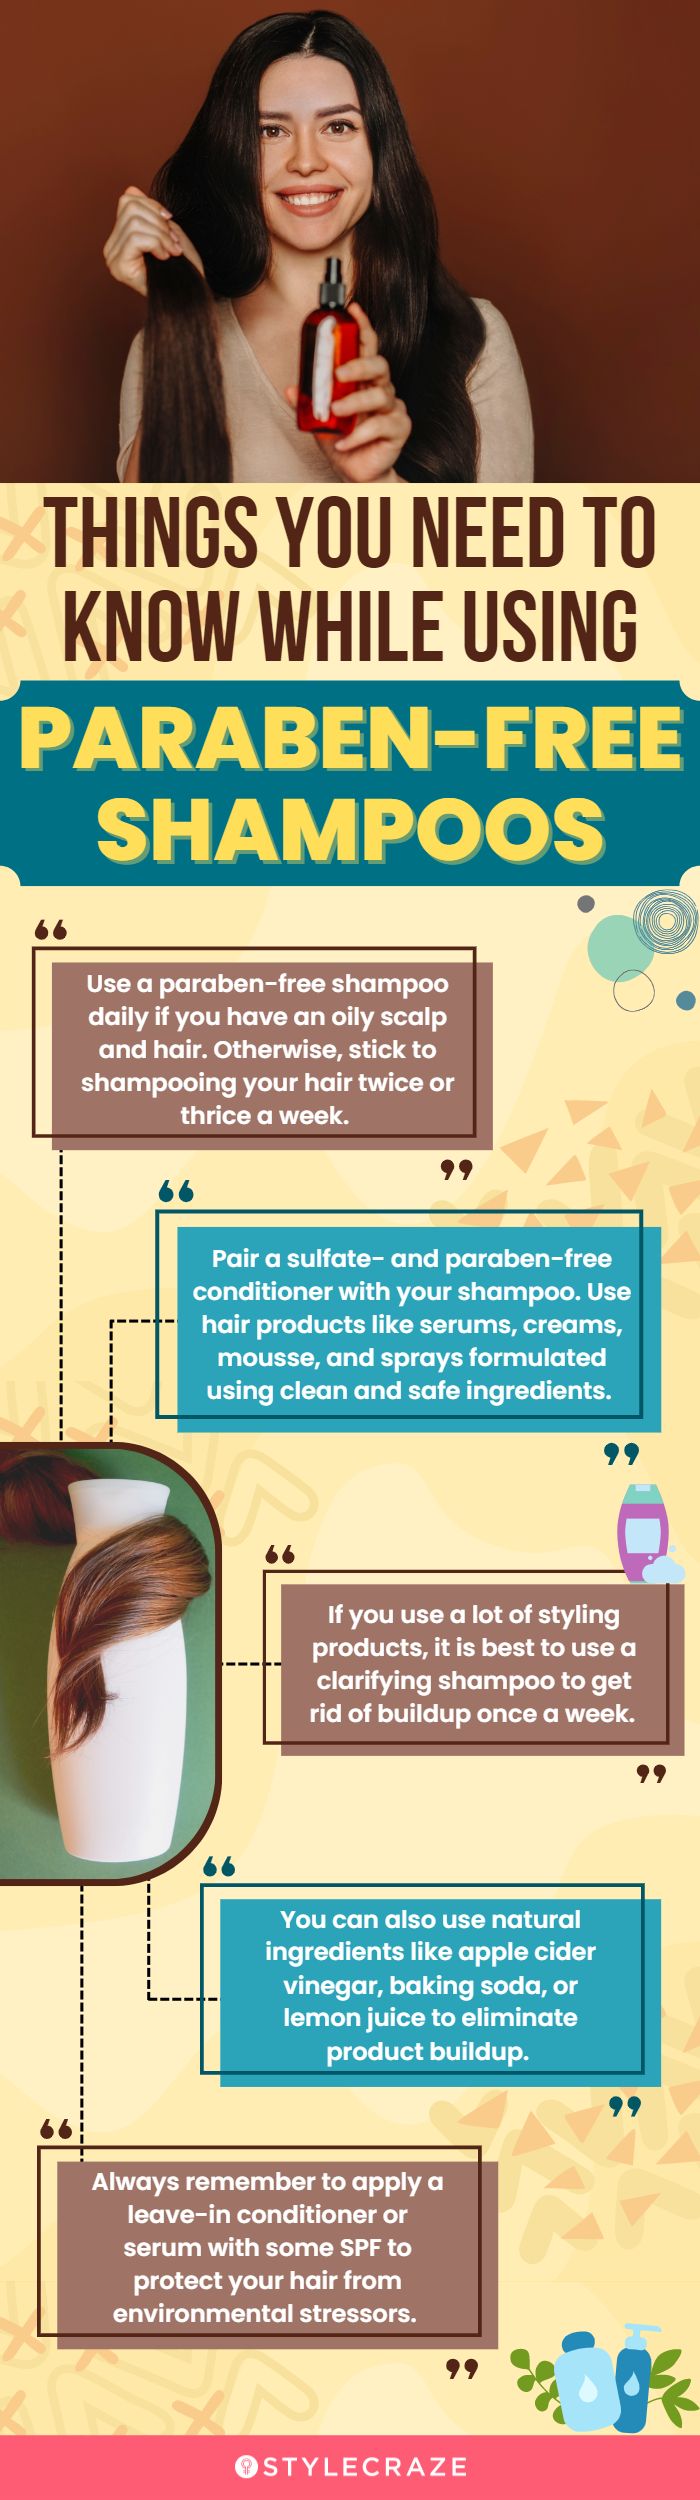 Things To Know While Using Paraben-Free Shampoos(infographic)